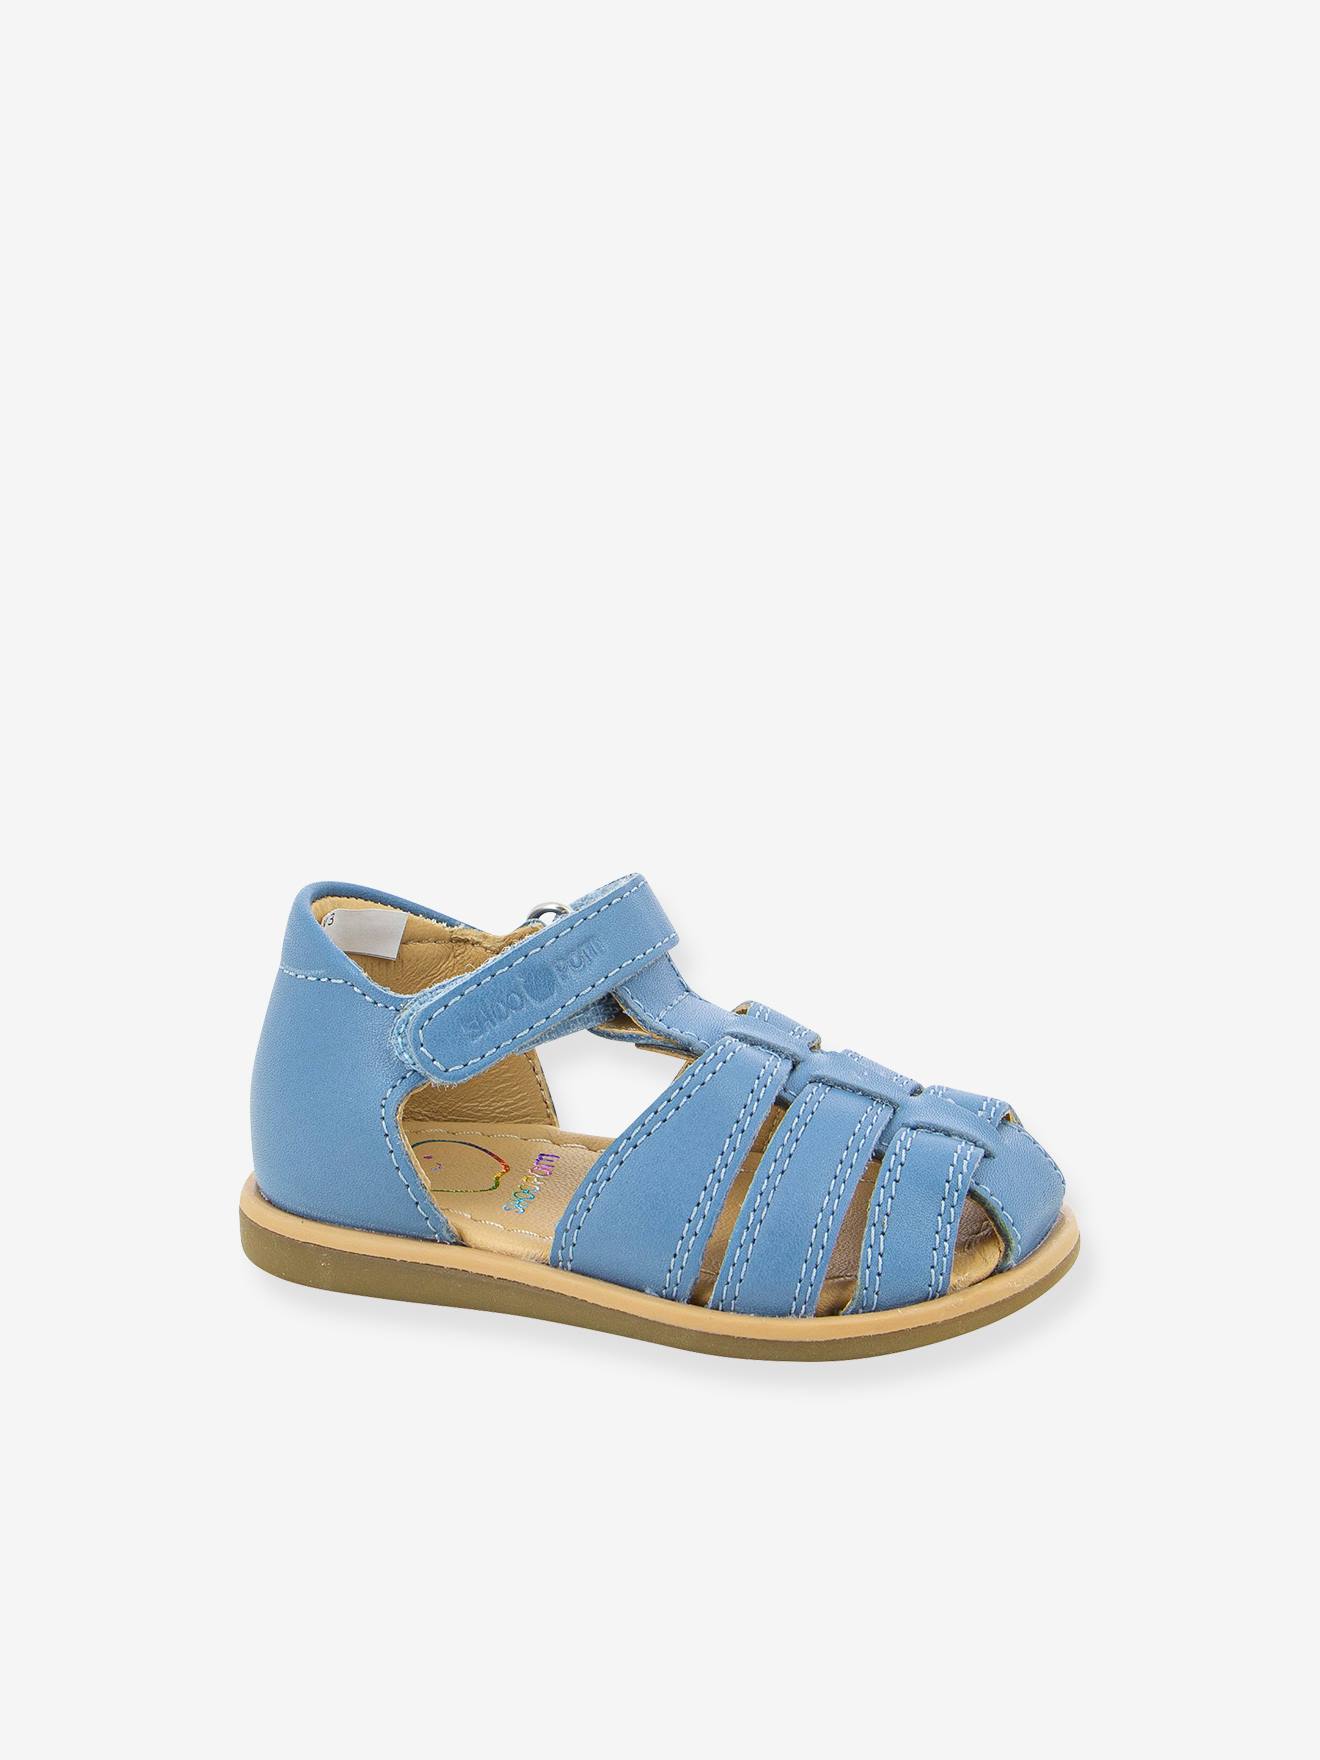 Tity Tonton Sandals for Babies, by SHOO POM(r) blue